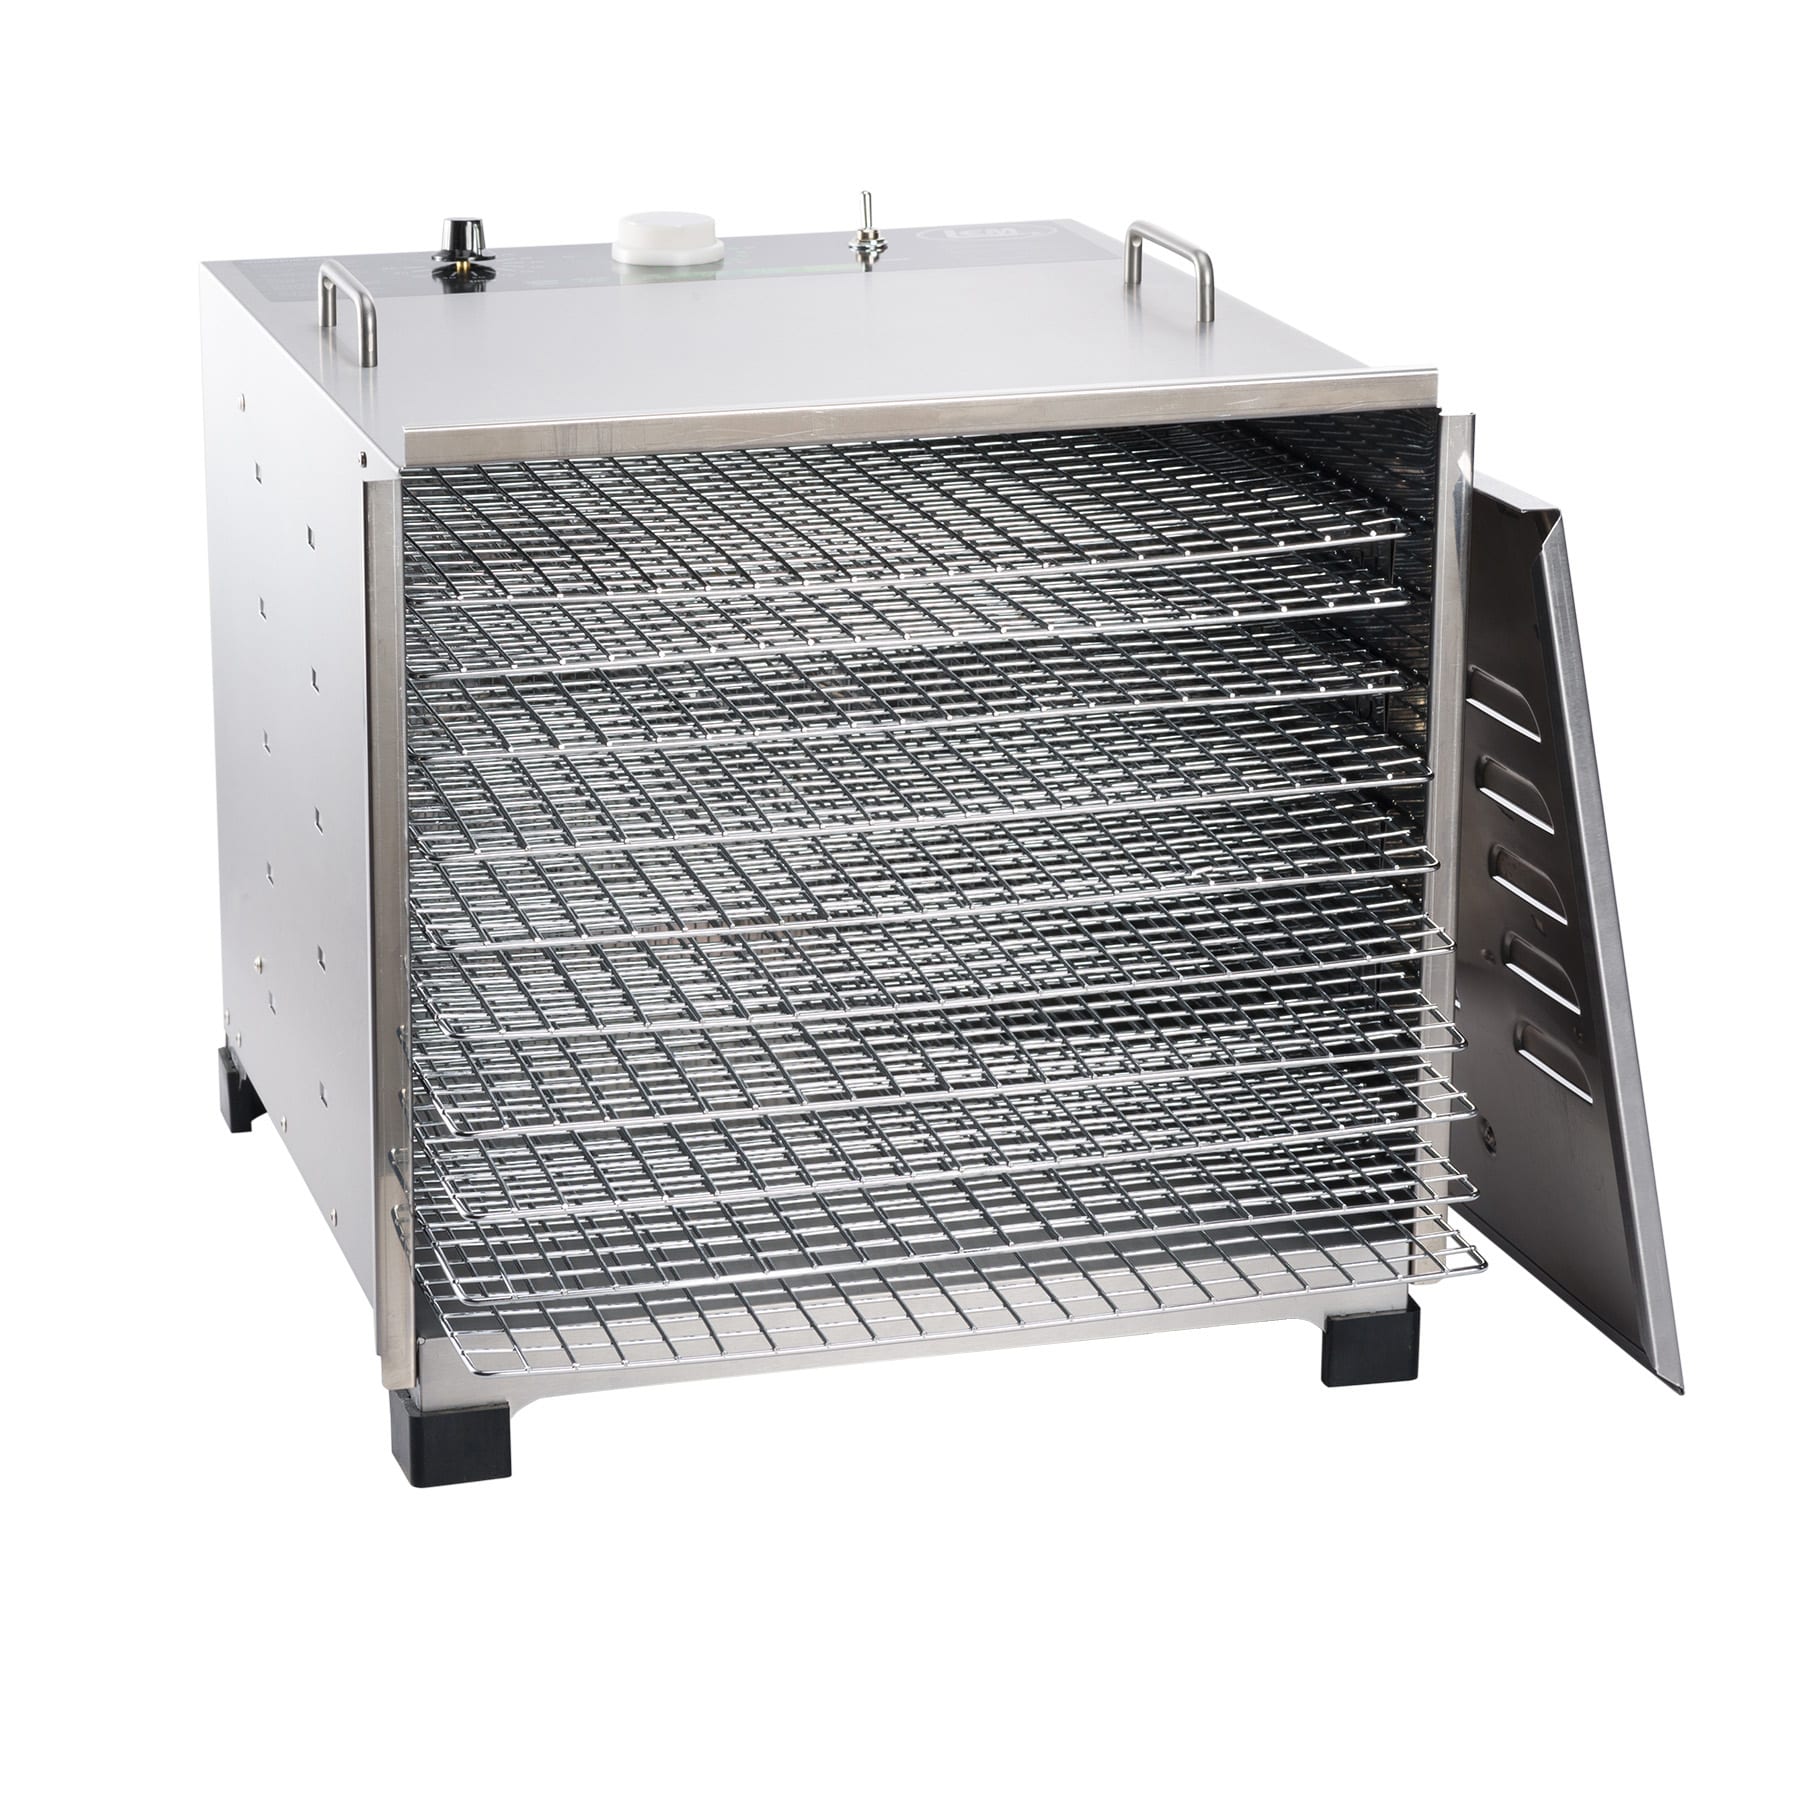 https://vacuumsealersunlimited.com/wp-content/uploads/STAINLESS-STEEL-10-TRAY-DEHYDRATOR.jpg